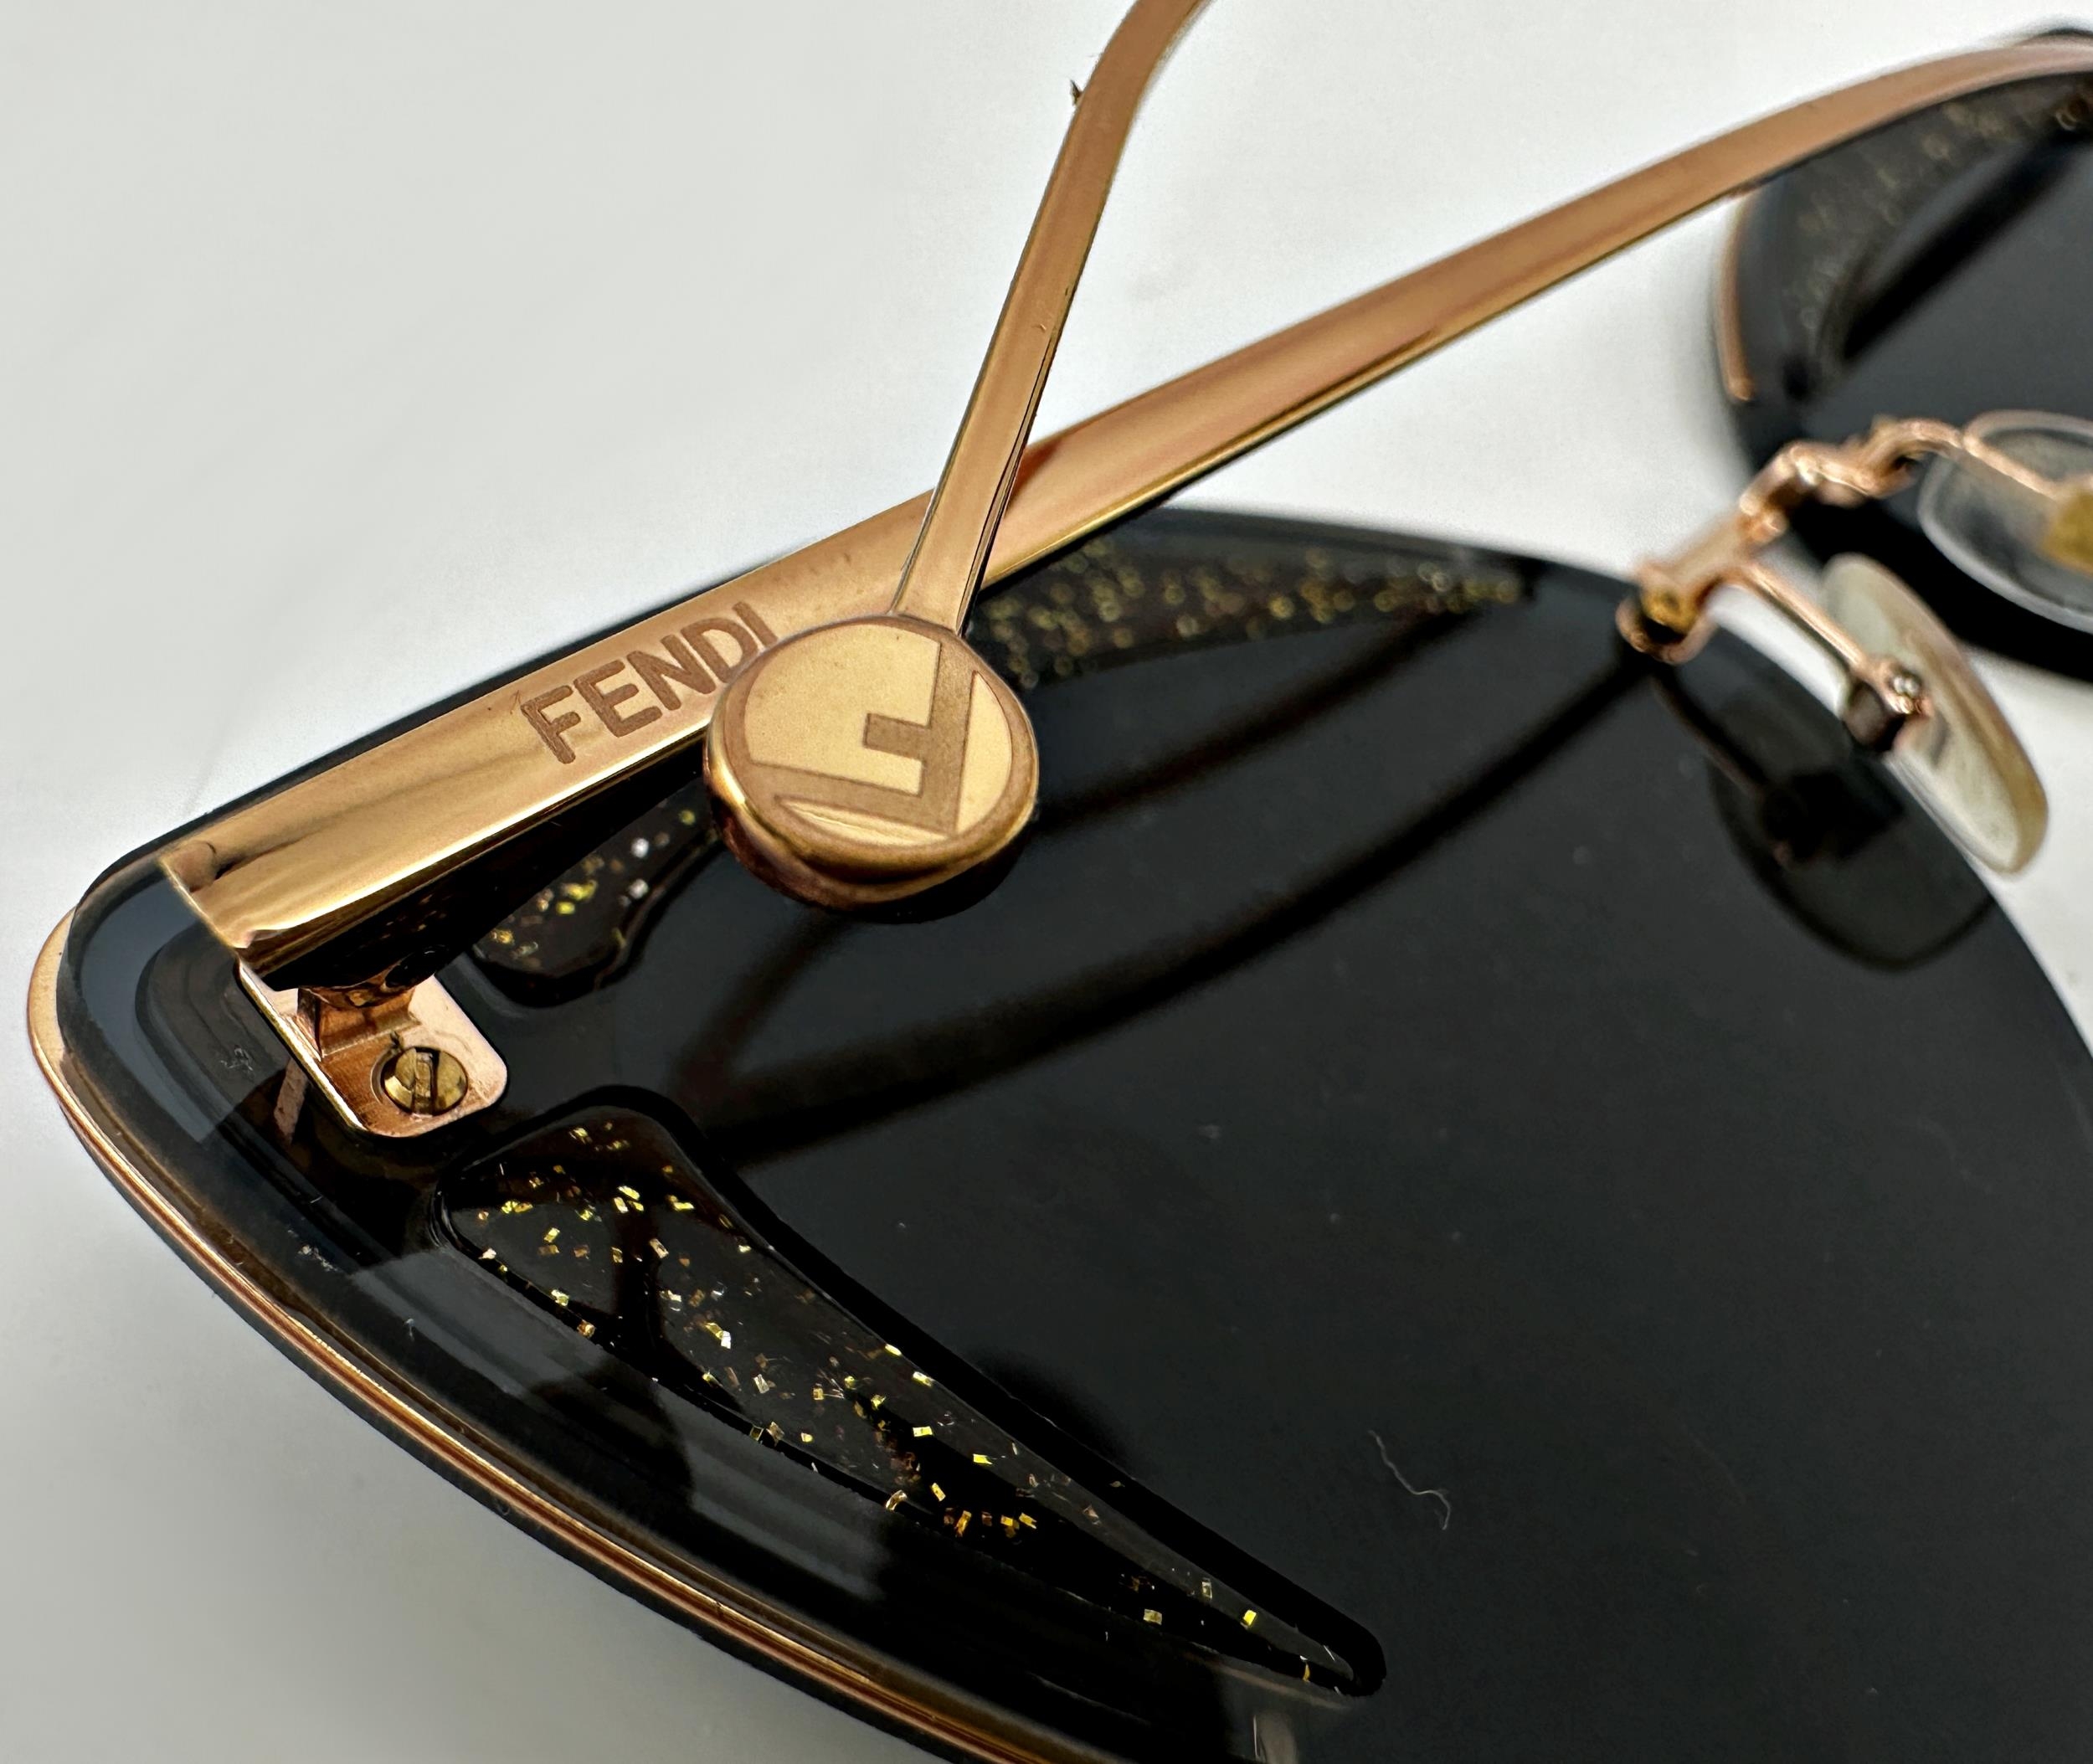 Fendi Eyewear Glittered Cat Eye Sunglasses in black and gold with branded dust cloth and case - Image 3 of 3